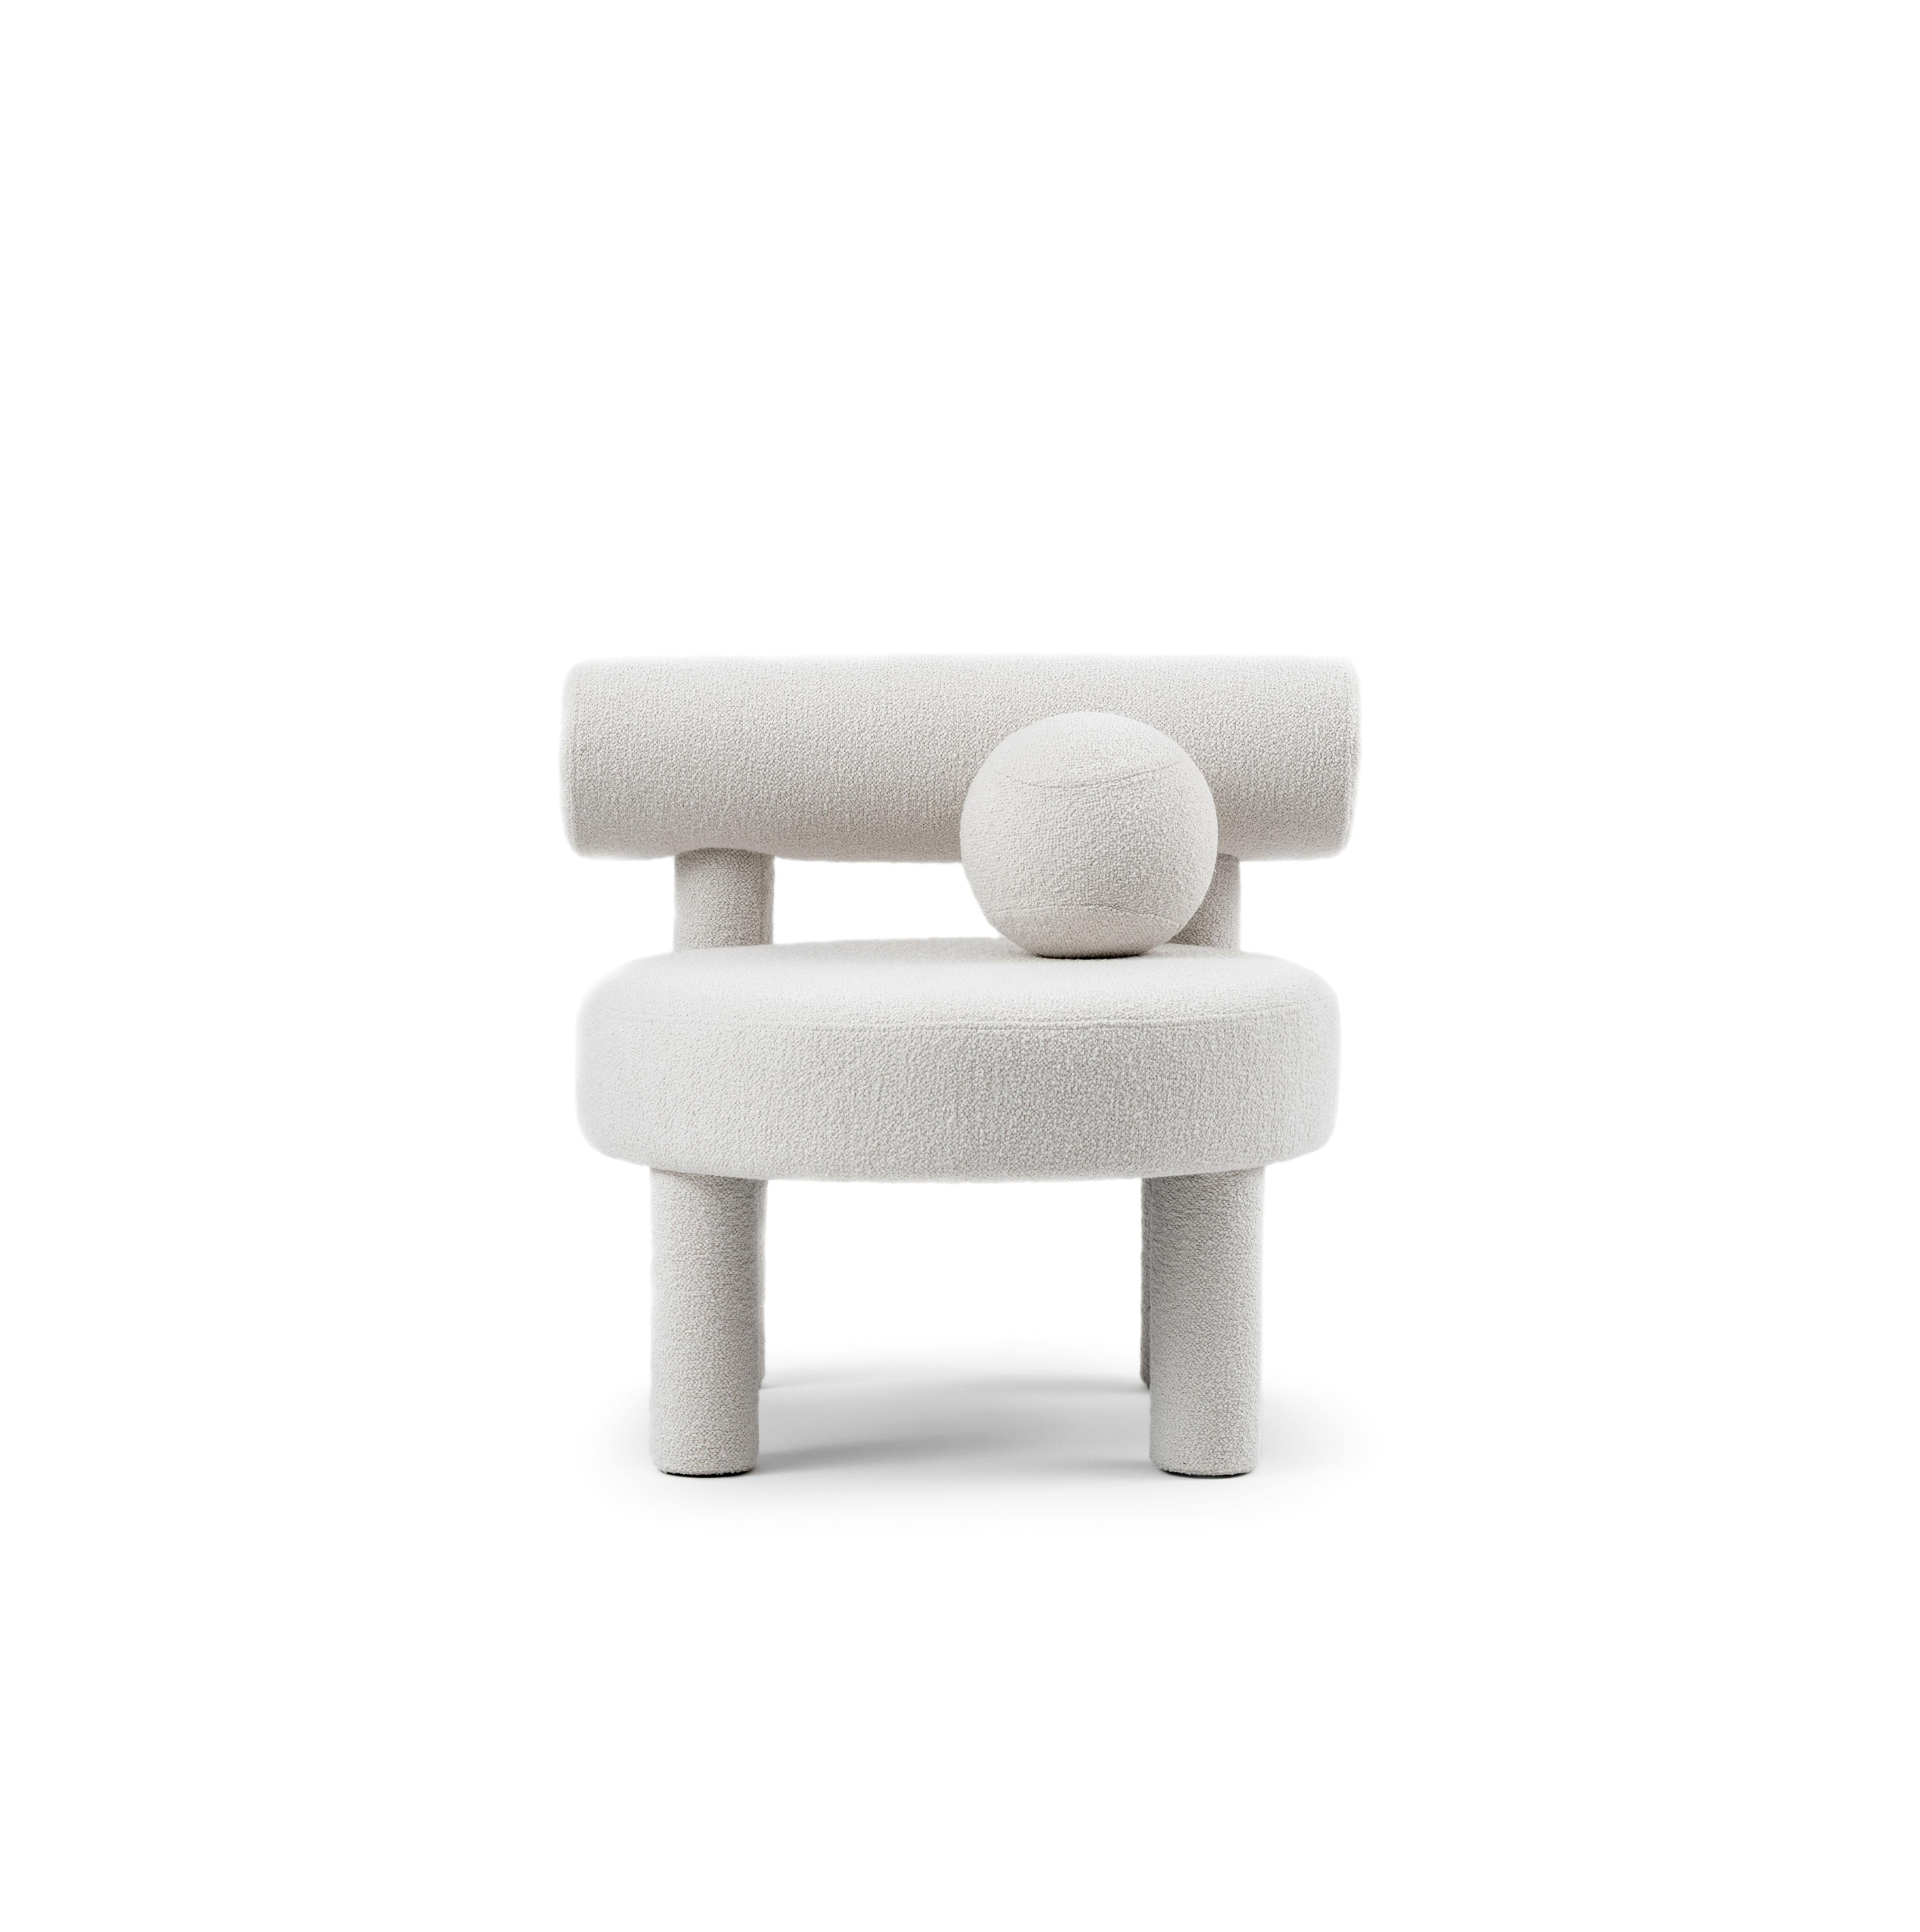 Low Chair GROPIUS CS1 by Noom
Model : Category 1 - BALOO
Designer: Kateryna Sokolova

Dimensions:
Height: 71 cm / 27,95 in
Width: 75 cm / 29,53 in
Depth: 75 cm / 29,53 in
Seat height: 44 cm / 17,32 in

New NOOM furniture collection is dedicated to